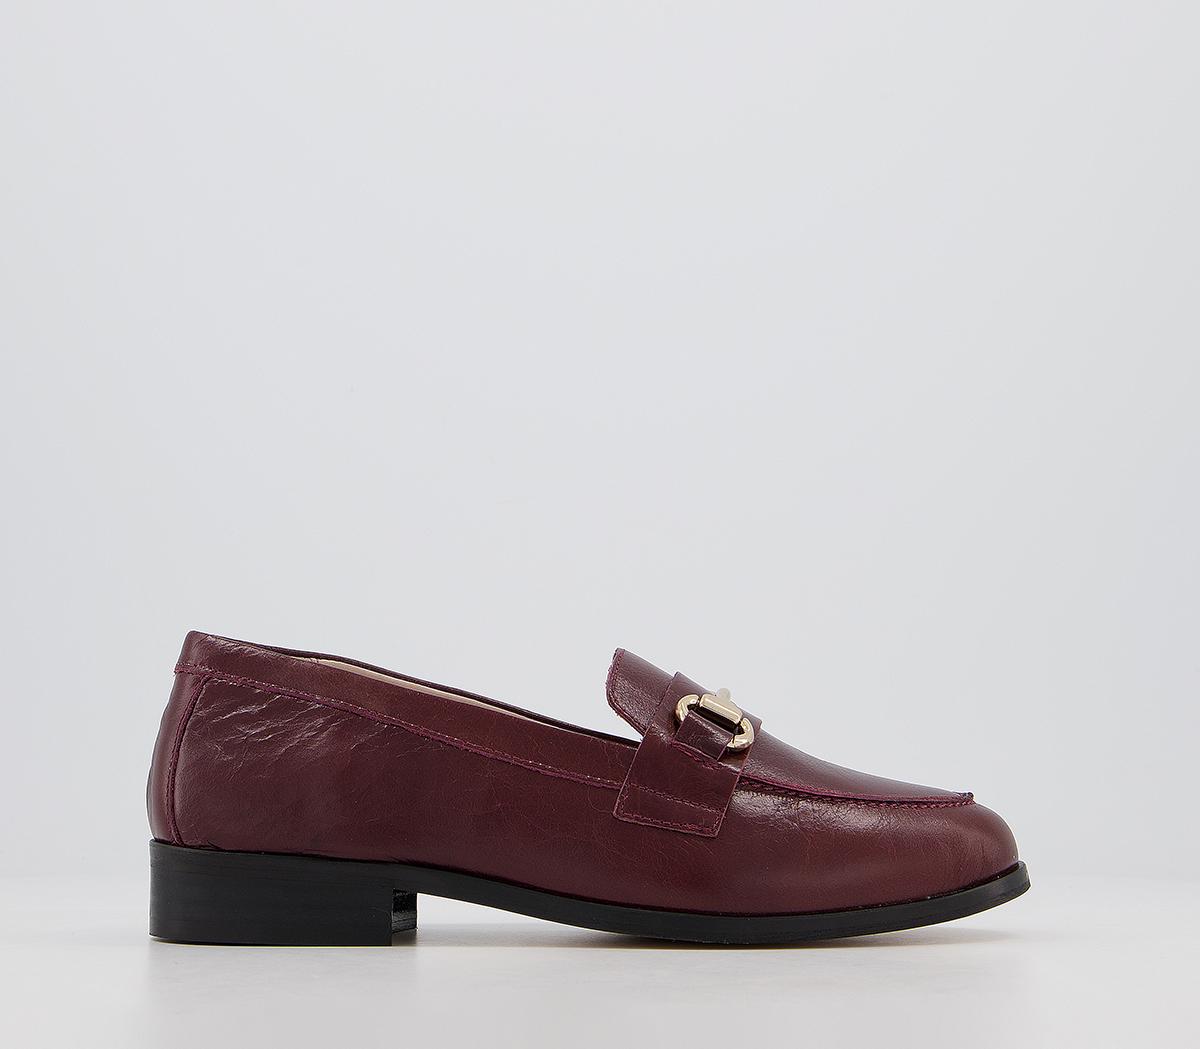 OFFICEFluster LoafersBurgundy Groucho Leather